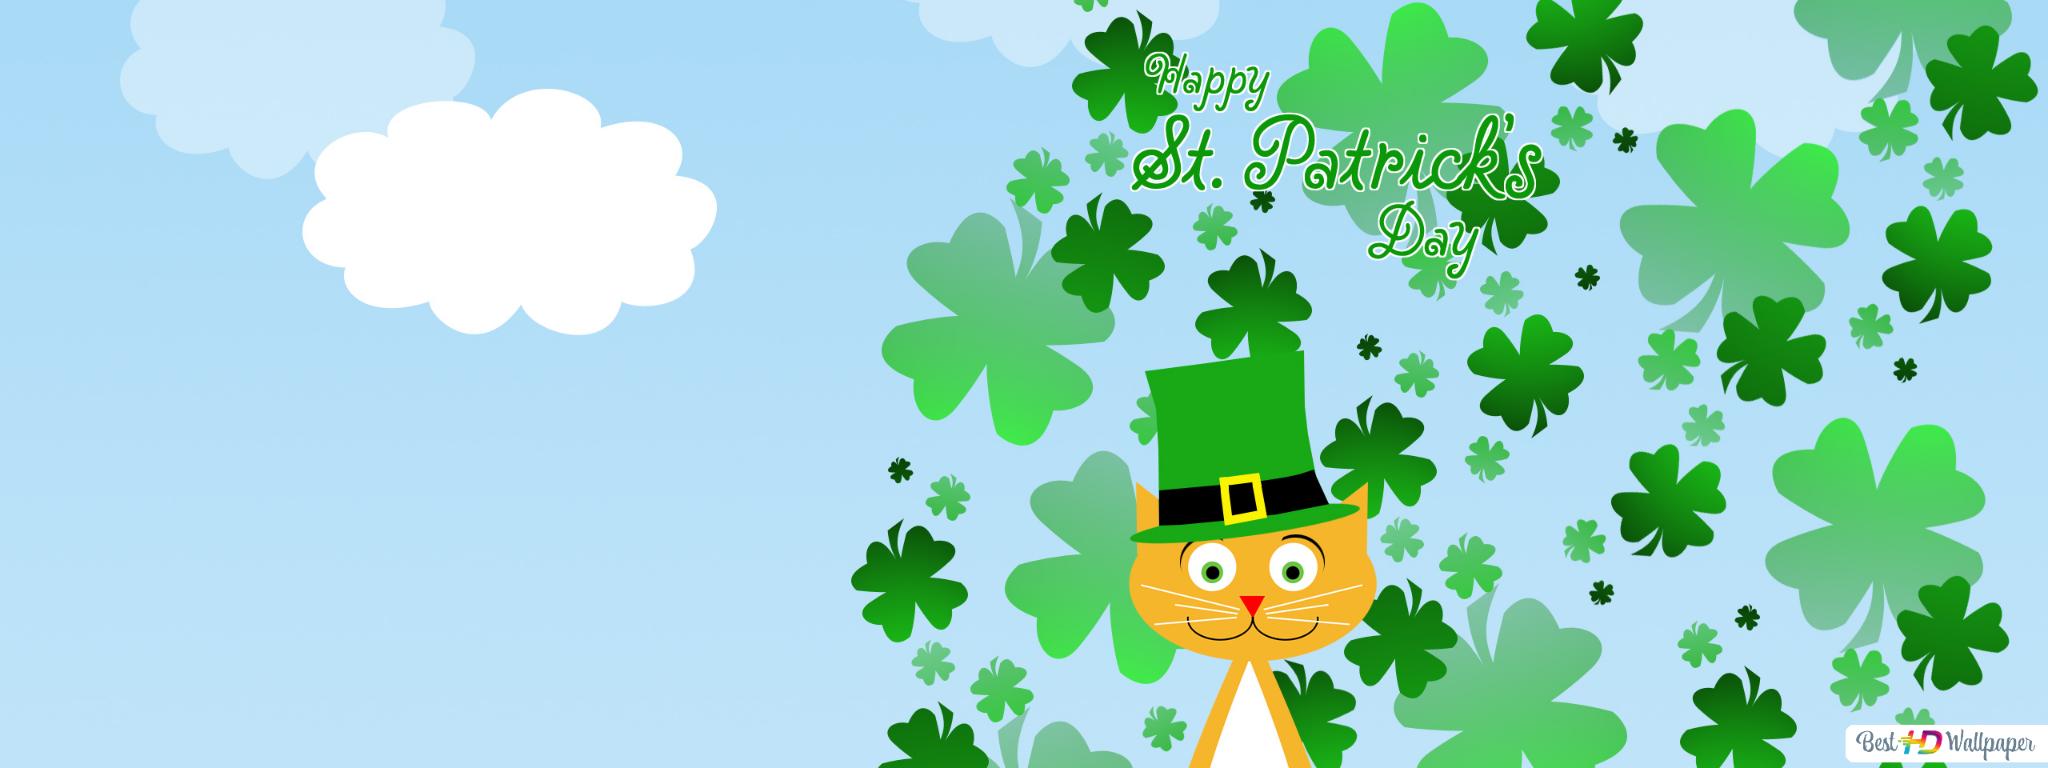 Lucky Cat and Green Hat on St. Patrick's Day HD wallpaper download Patrick's Day wallpaper